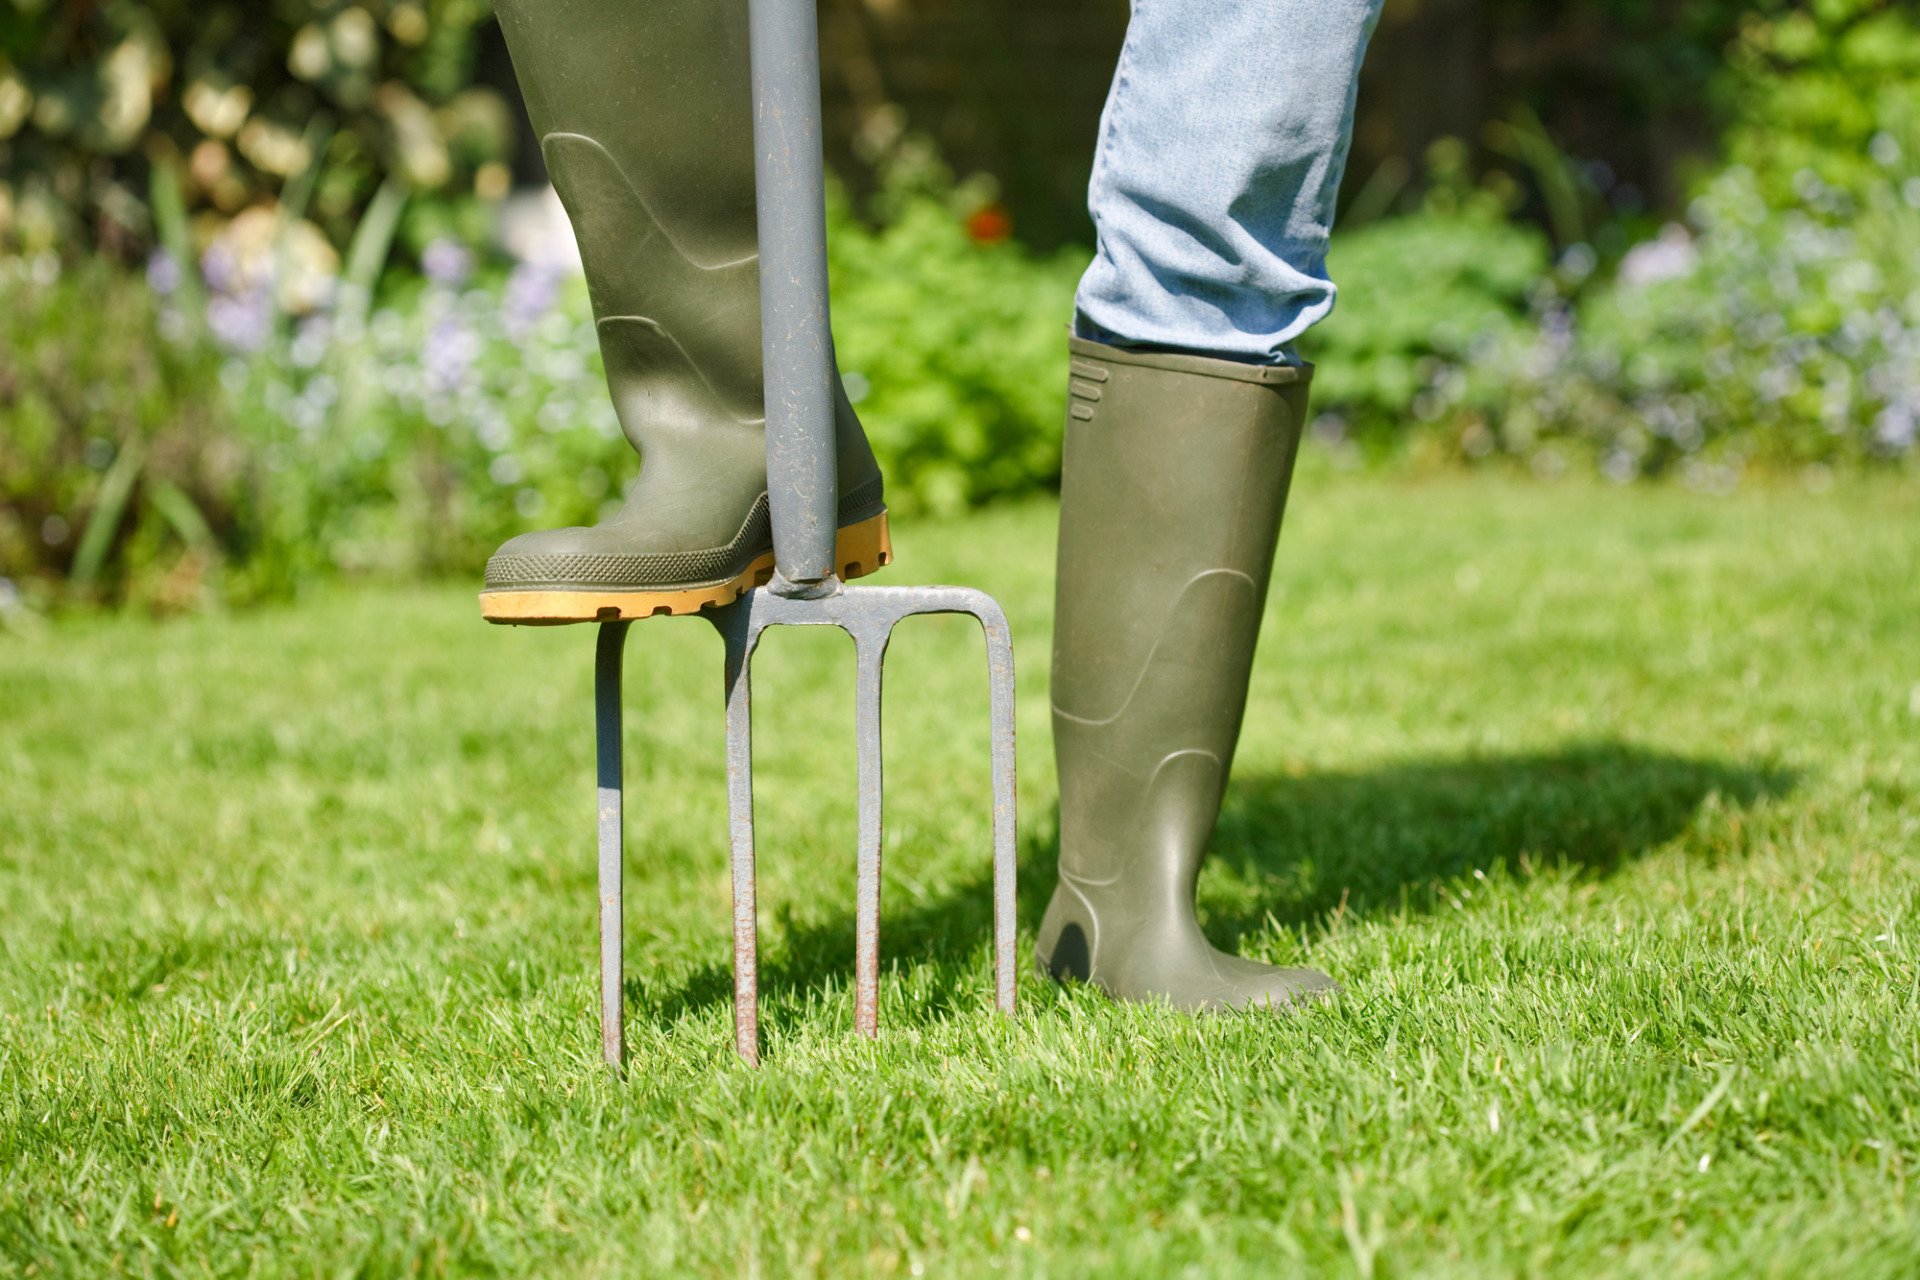 summer lawn care tip #5: aerate your lawn